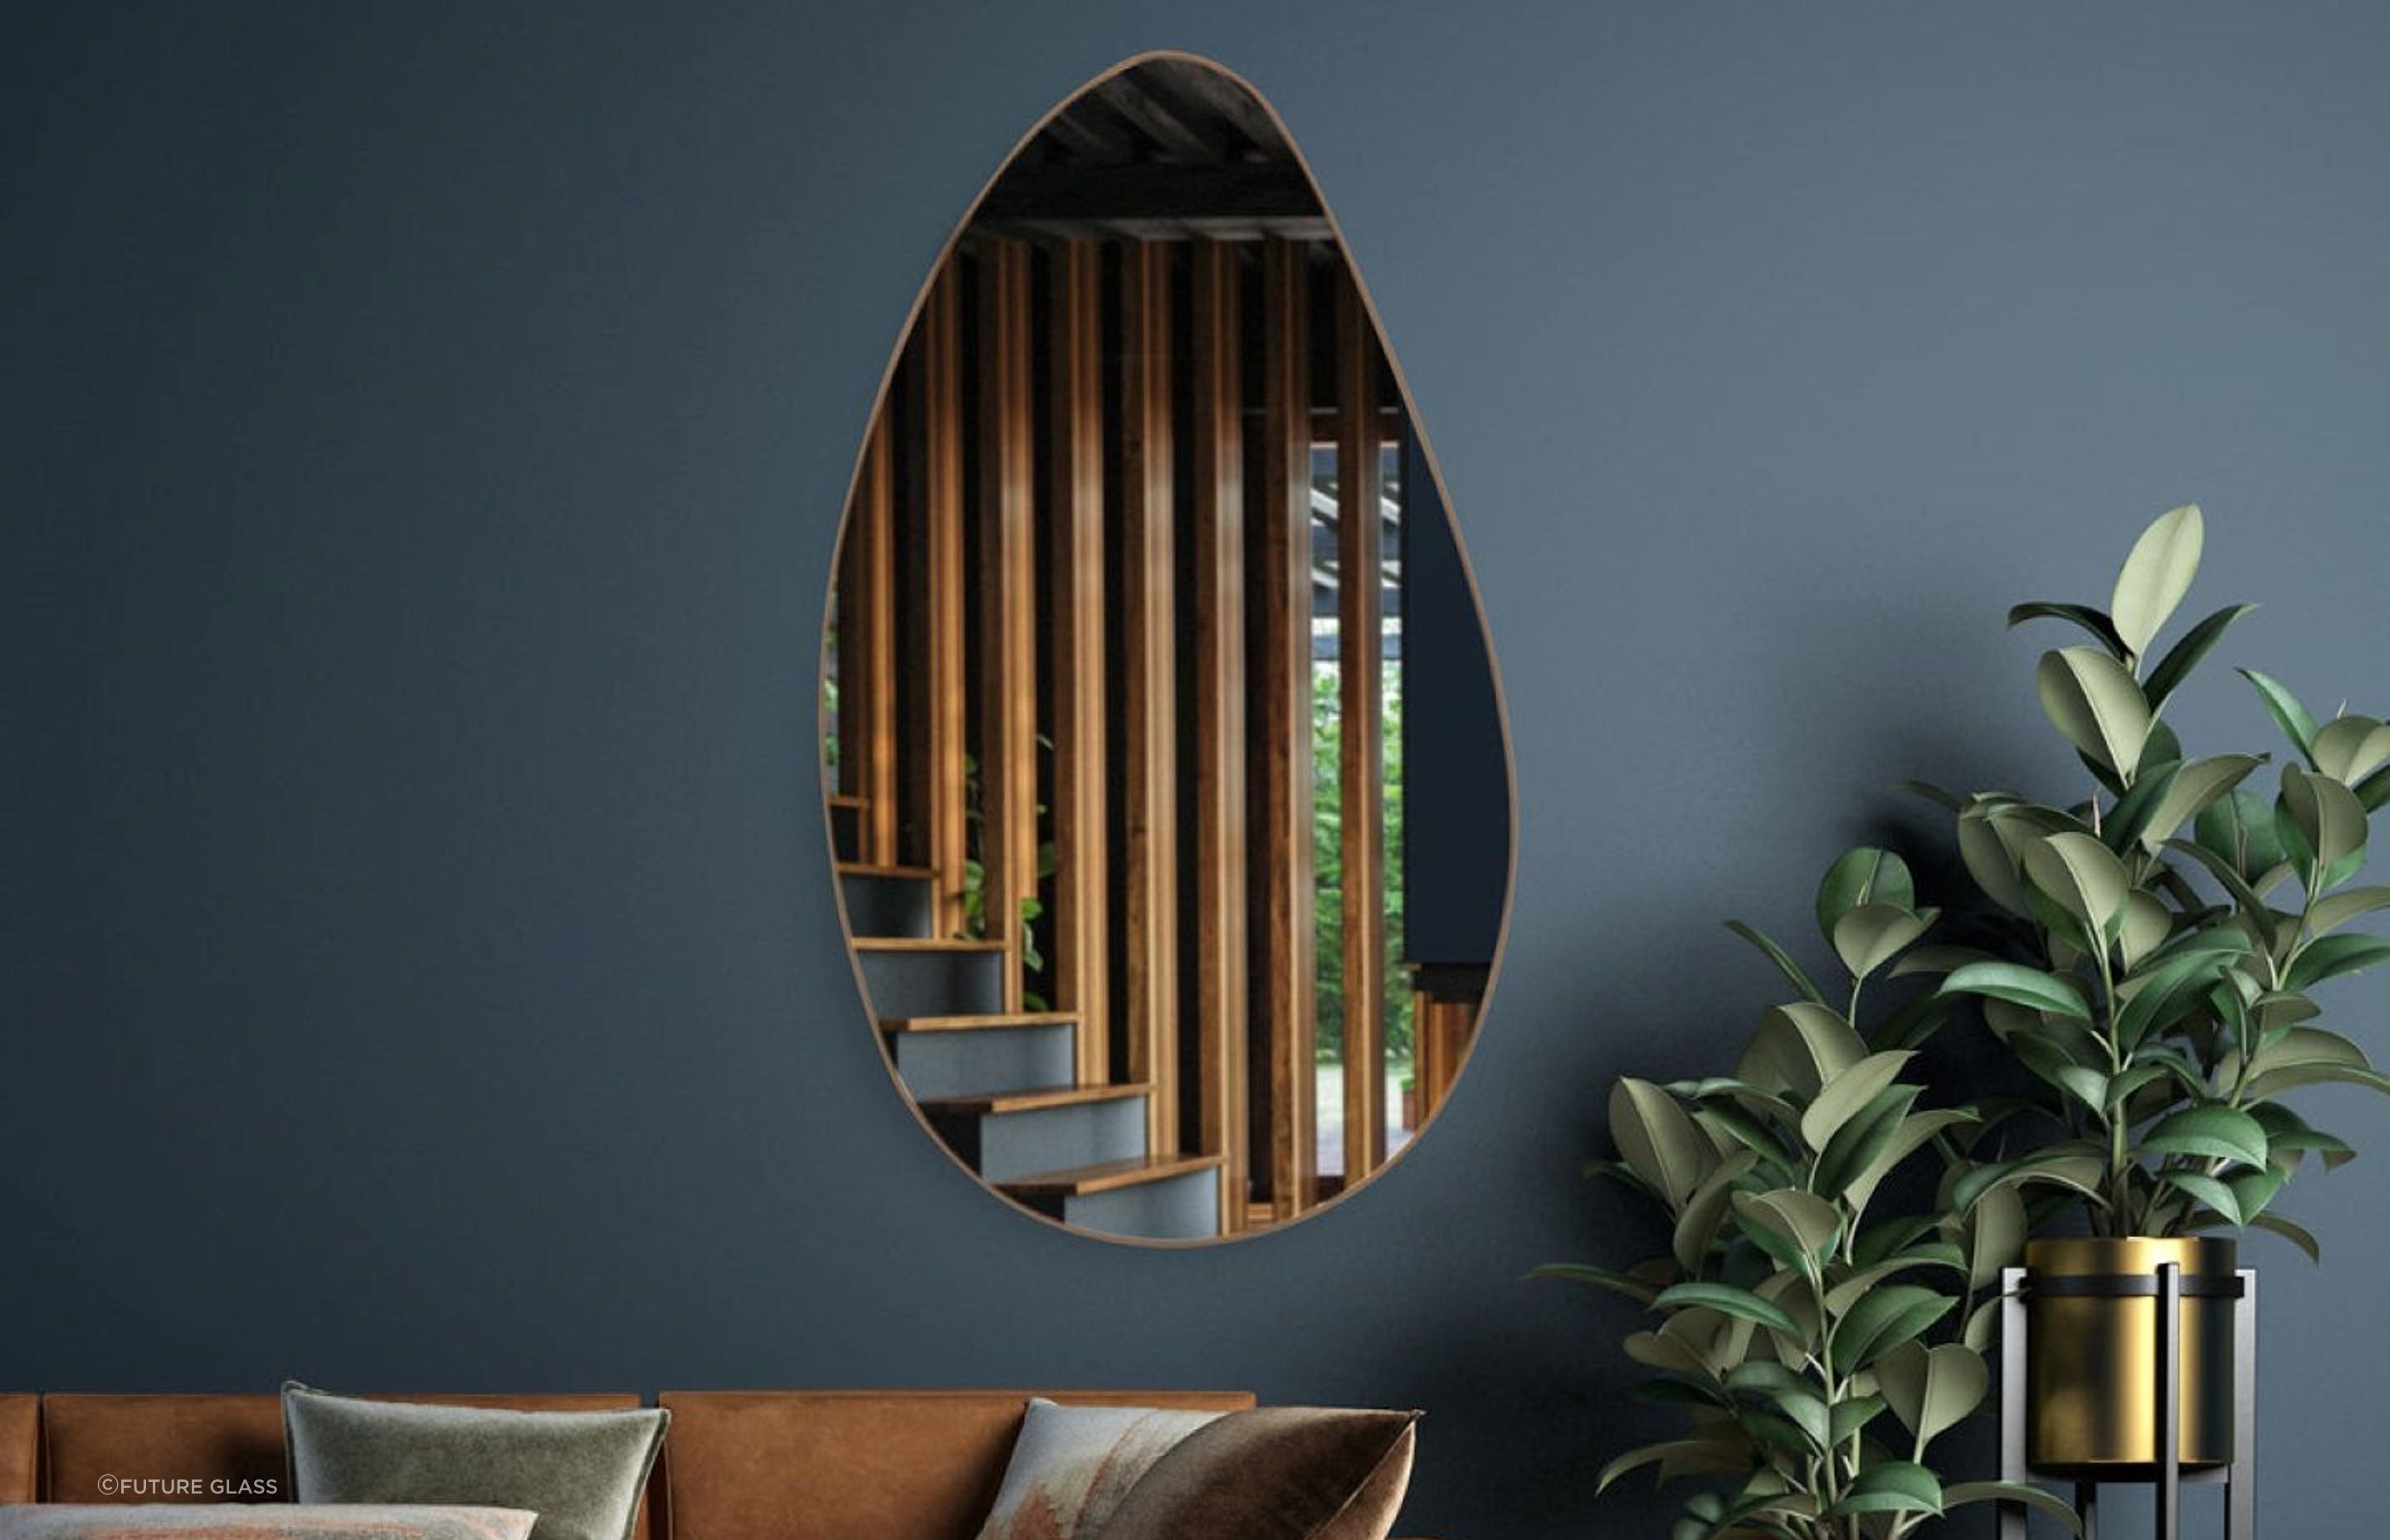 Mirrors can act as decorative additions to a living room but also make a room feel brighter and more welcoming.